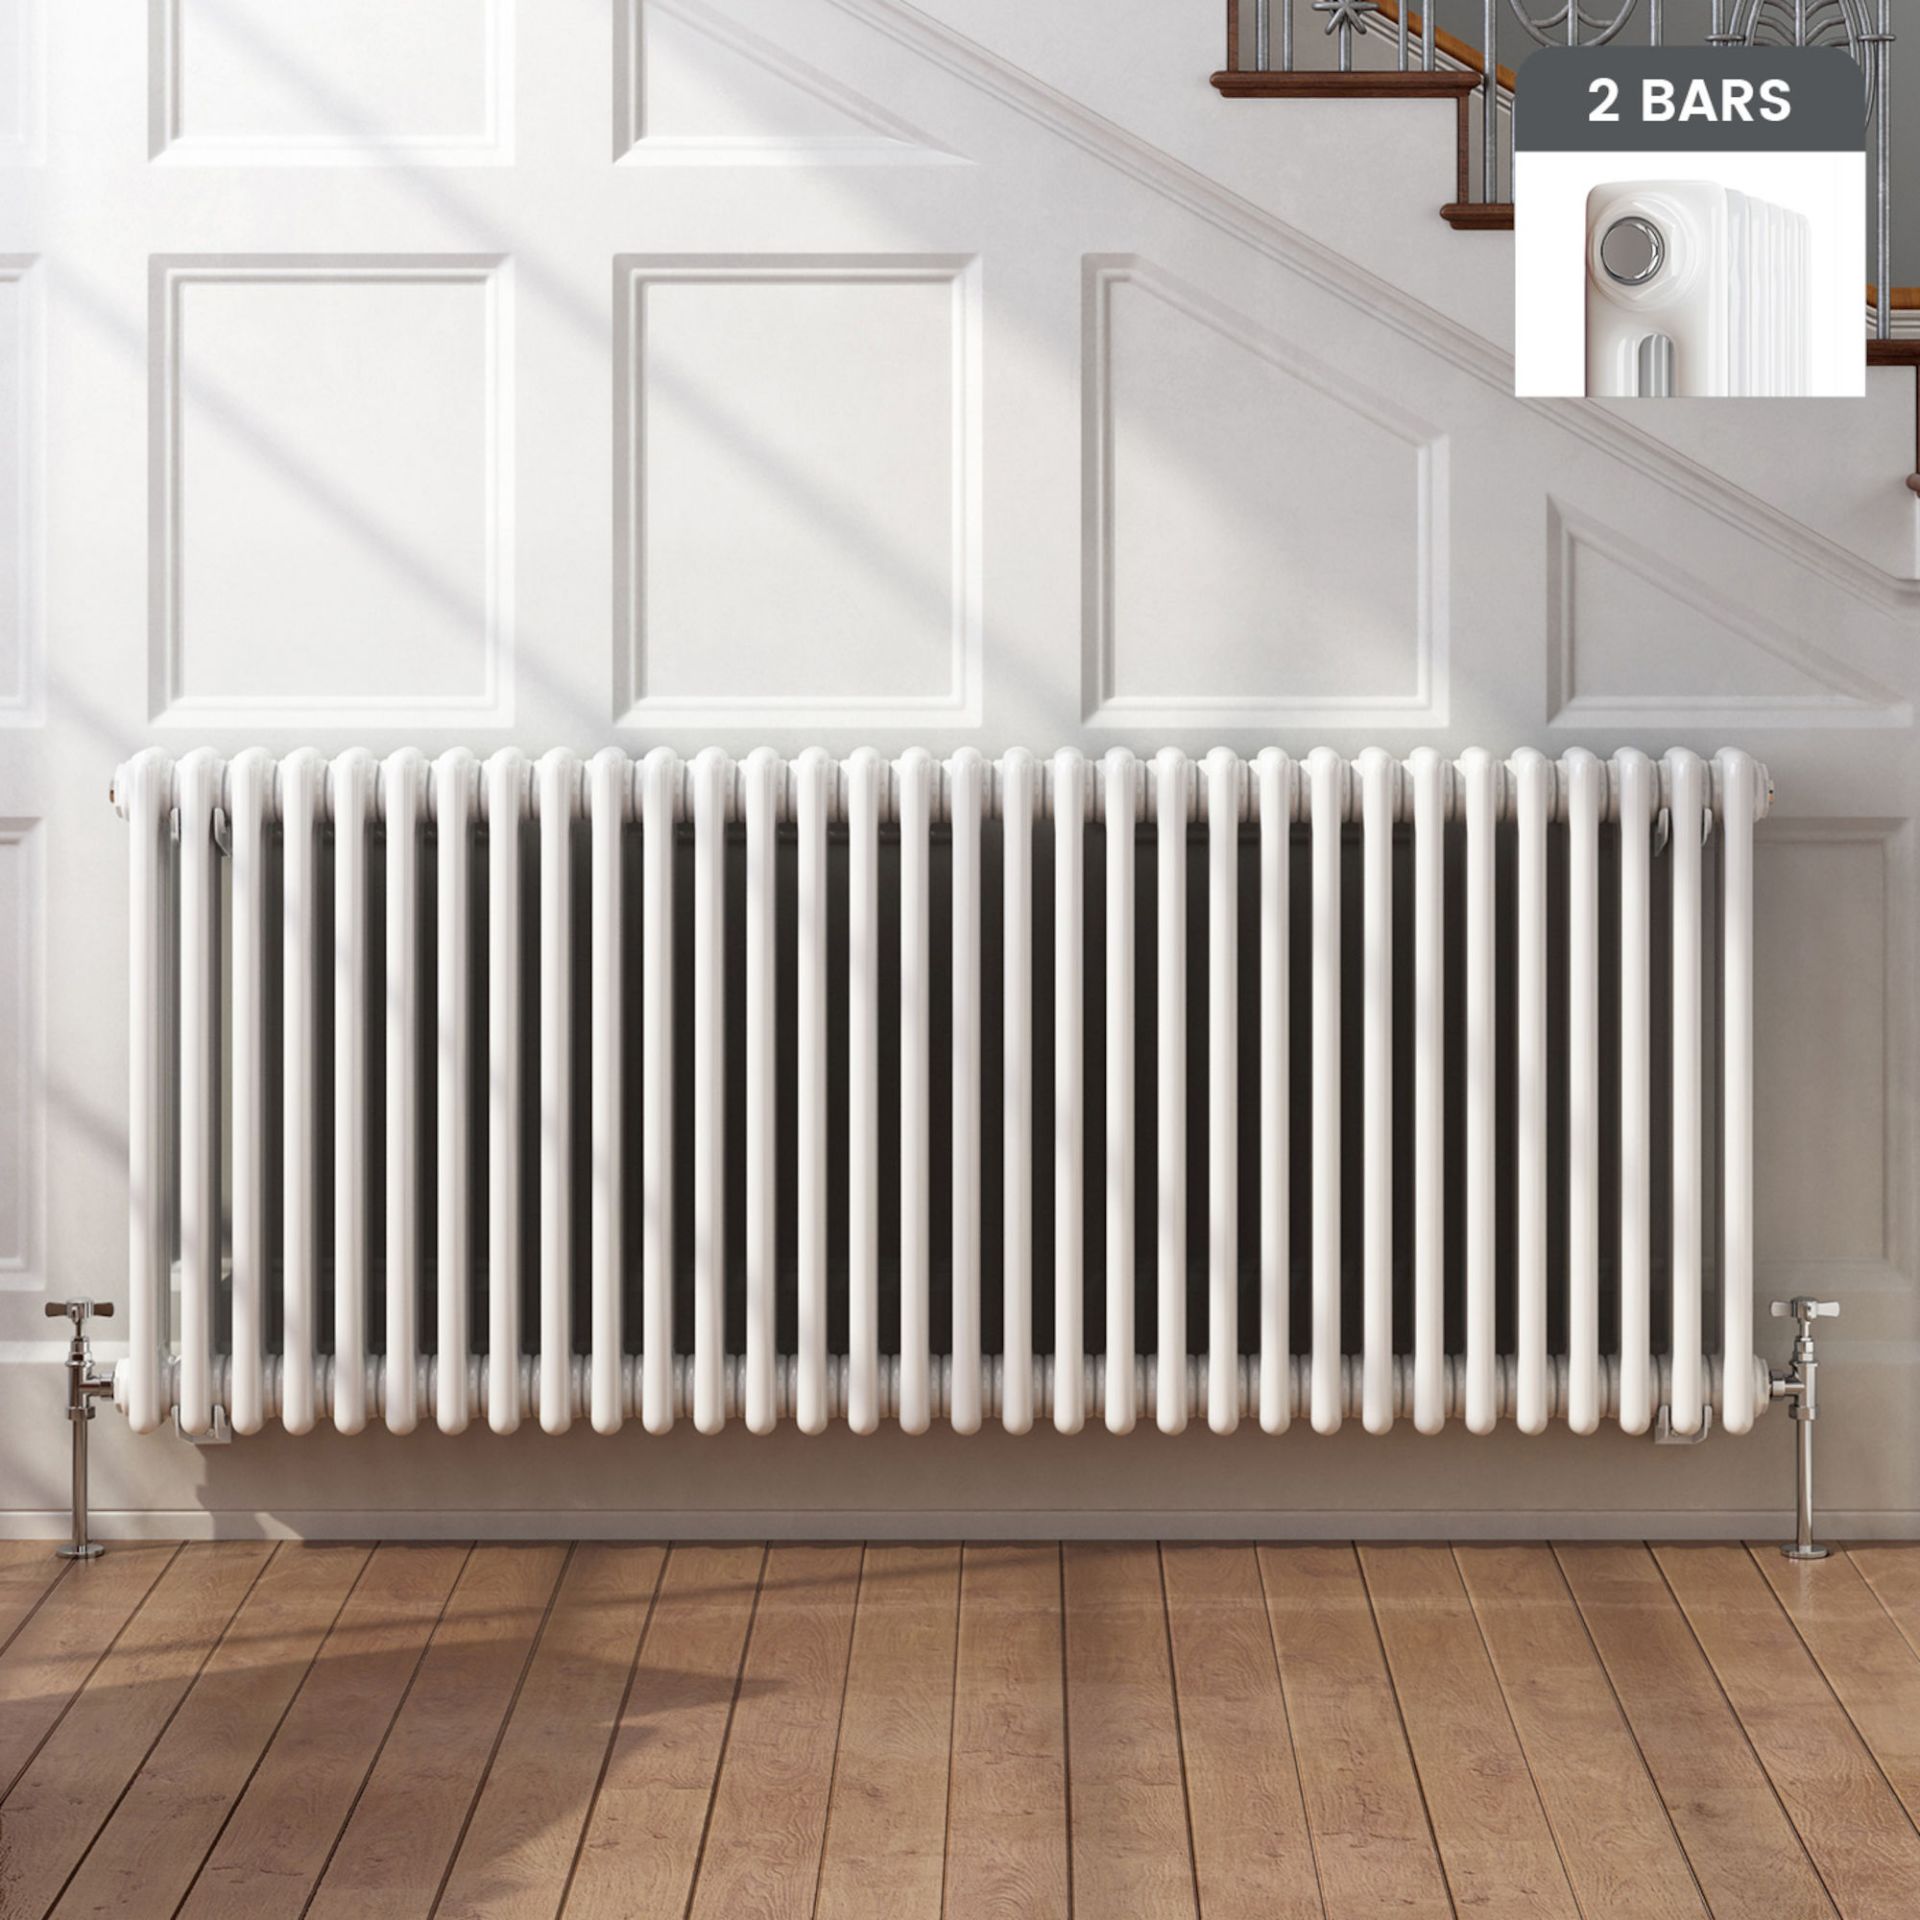 (PP16) 600x1458mm White Double Panel Horizontal Colosseum Traditional Radiator. RRP £552.99. M...